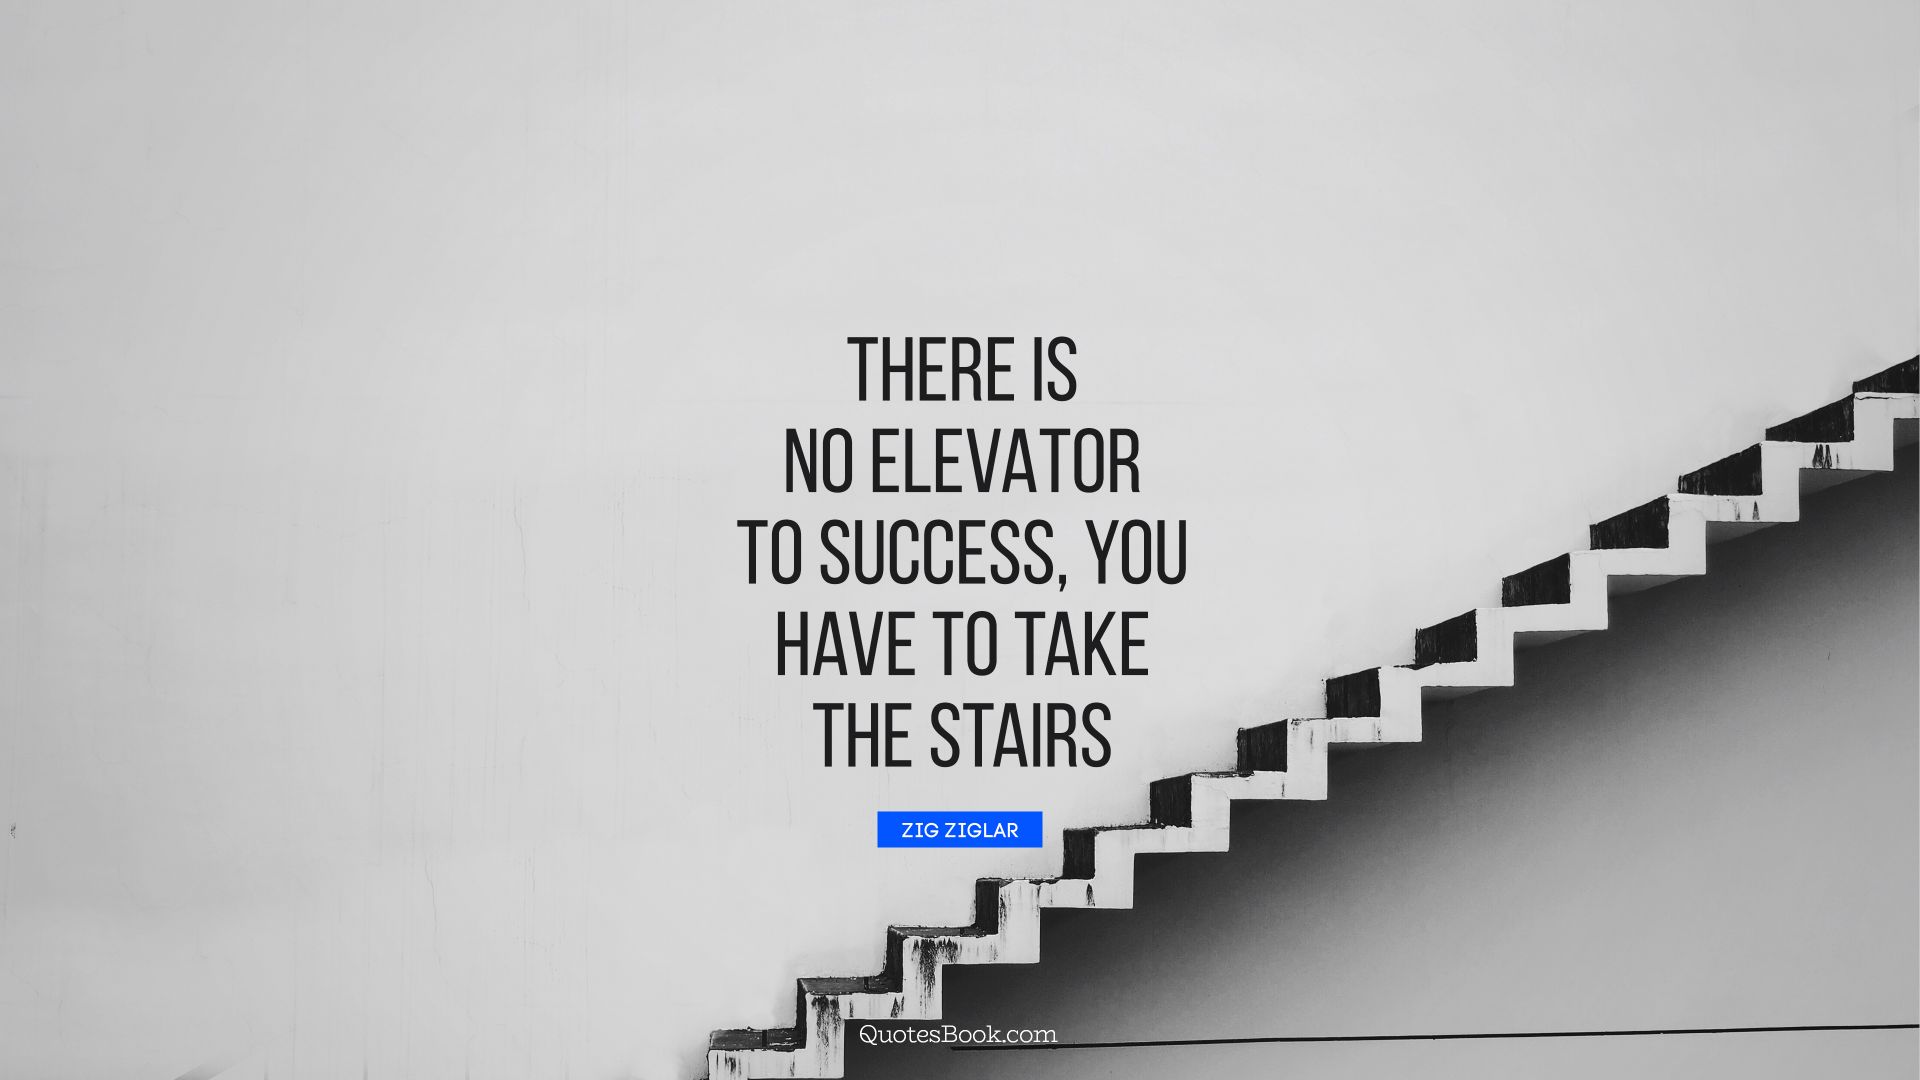 There is no elevator to success, you have to take the stairs. - Quote by Zig Ziglar